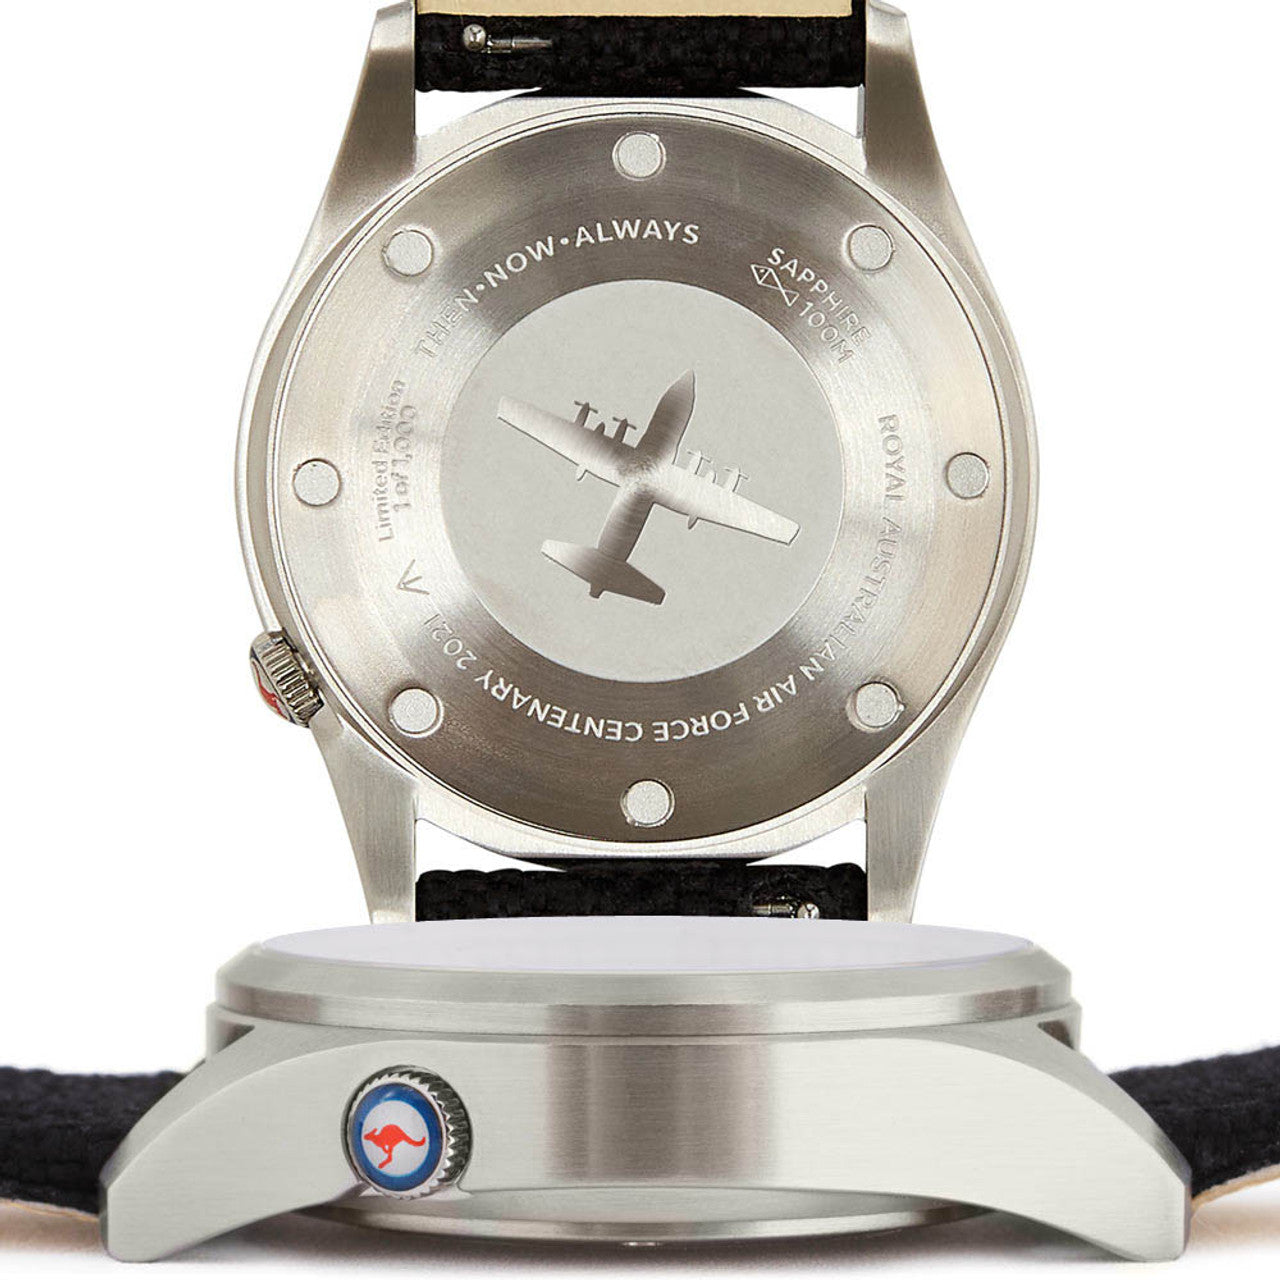 The Limited Edition Airfield Watch is not just a timepiece, but a piece of history. By purchasing this watch, you are supporting the restoration and preservation of historic RAAF aircraft. www.defenceqstore.com.au